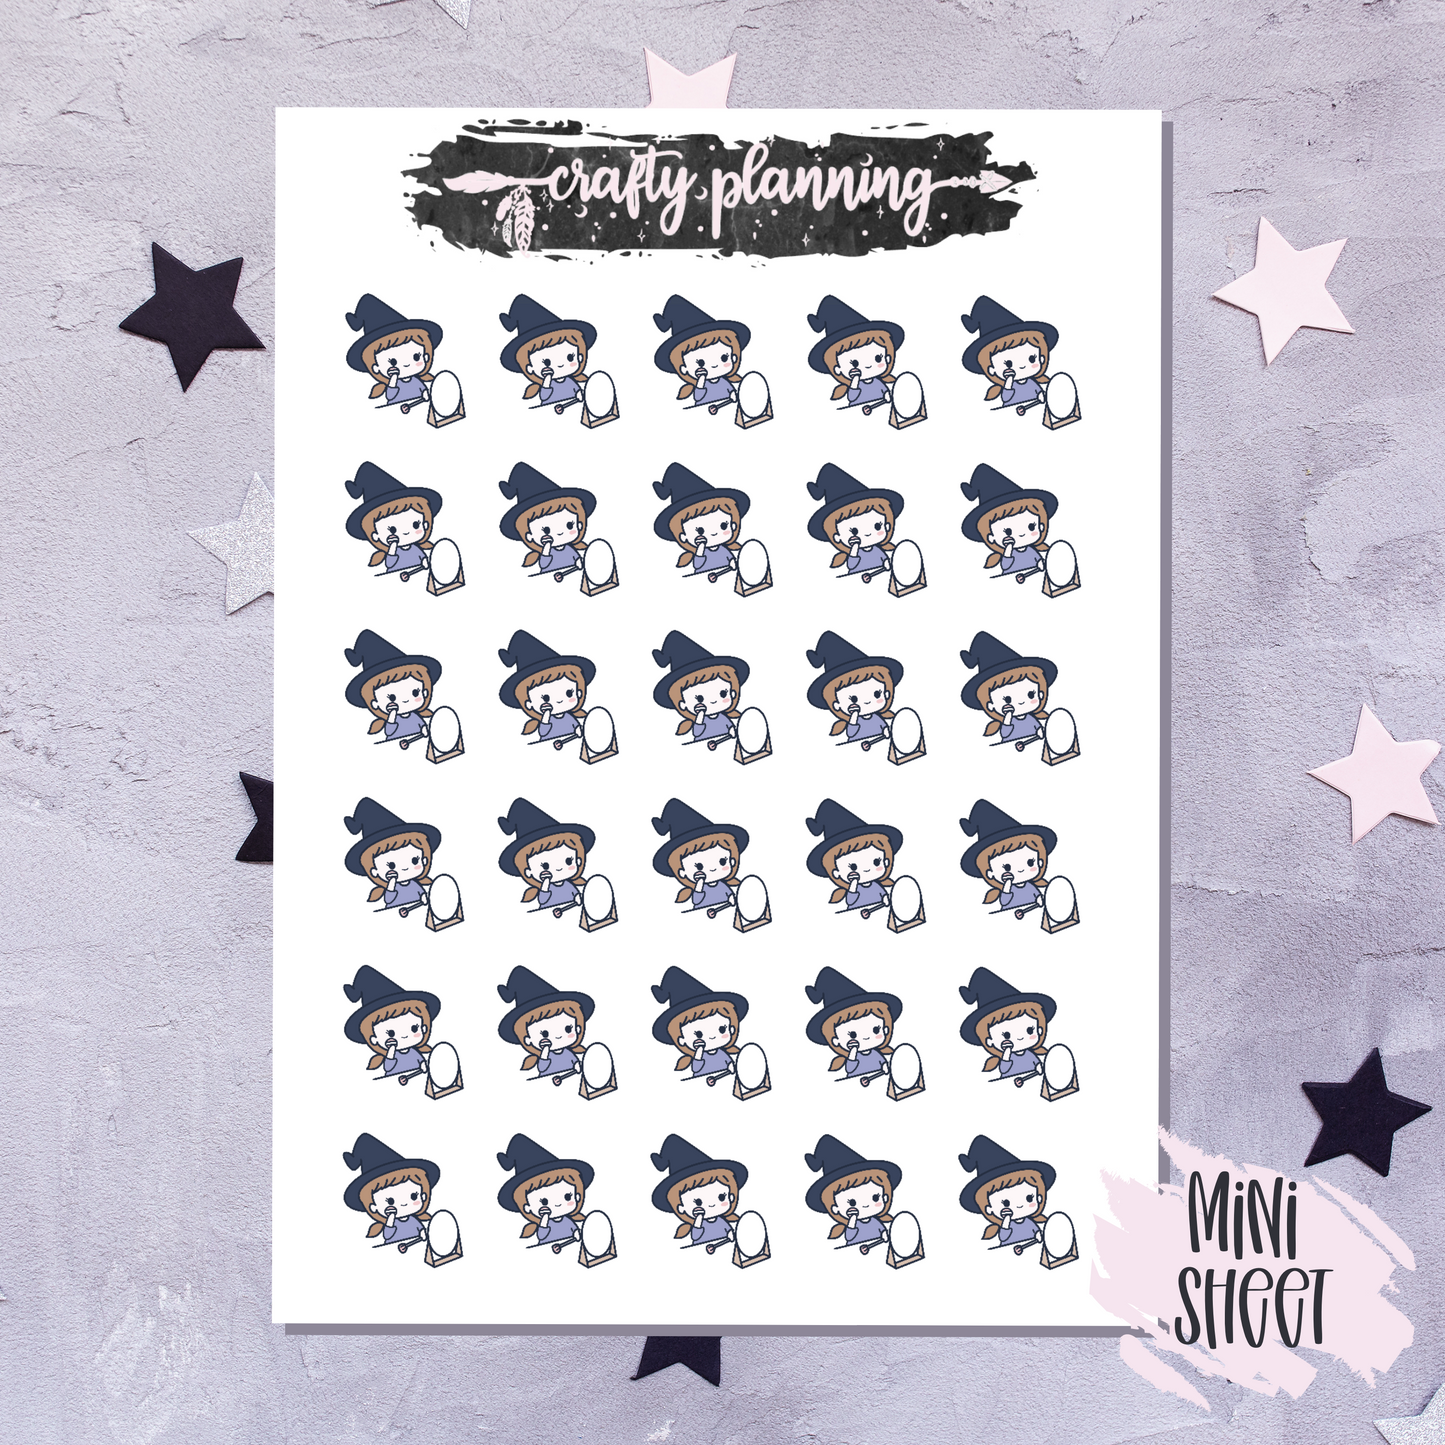 Make Up Stickers, Beauty Stickers, Self Care Stickers, Witch Stickers, Witchcraft Stickers, Witch Character, Planner Stickers, Queenie The Witch